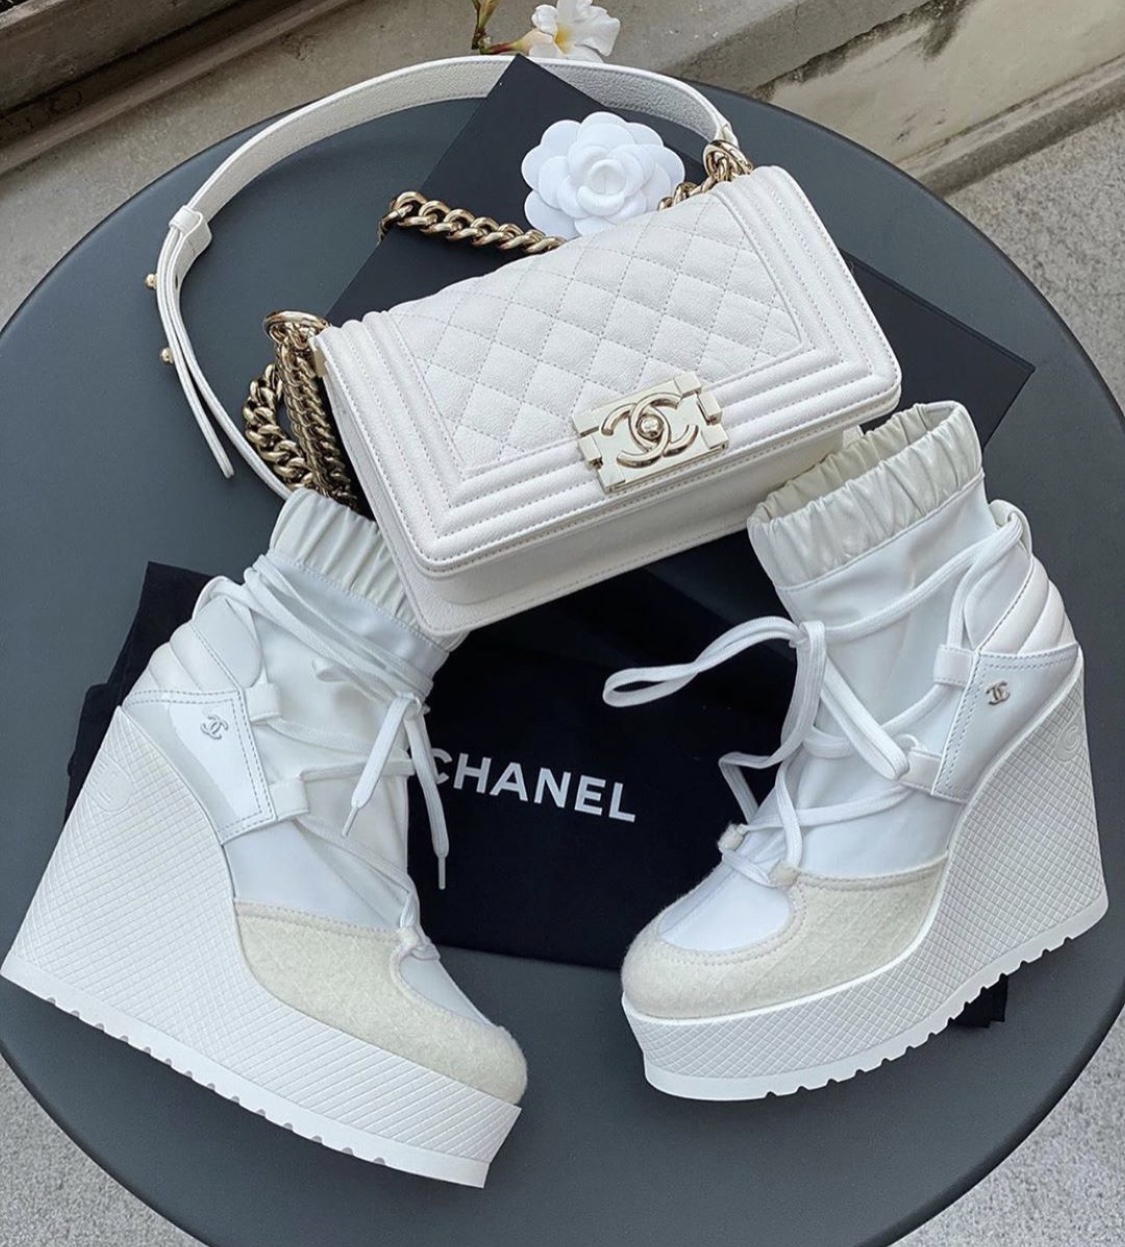 Bomb_Product_of_the_Day_Chanel_Lace_Up_Platform_Boot